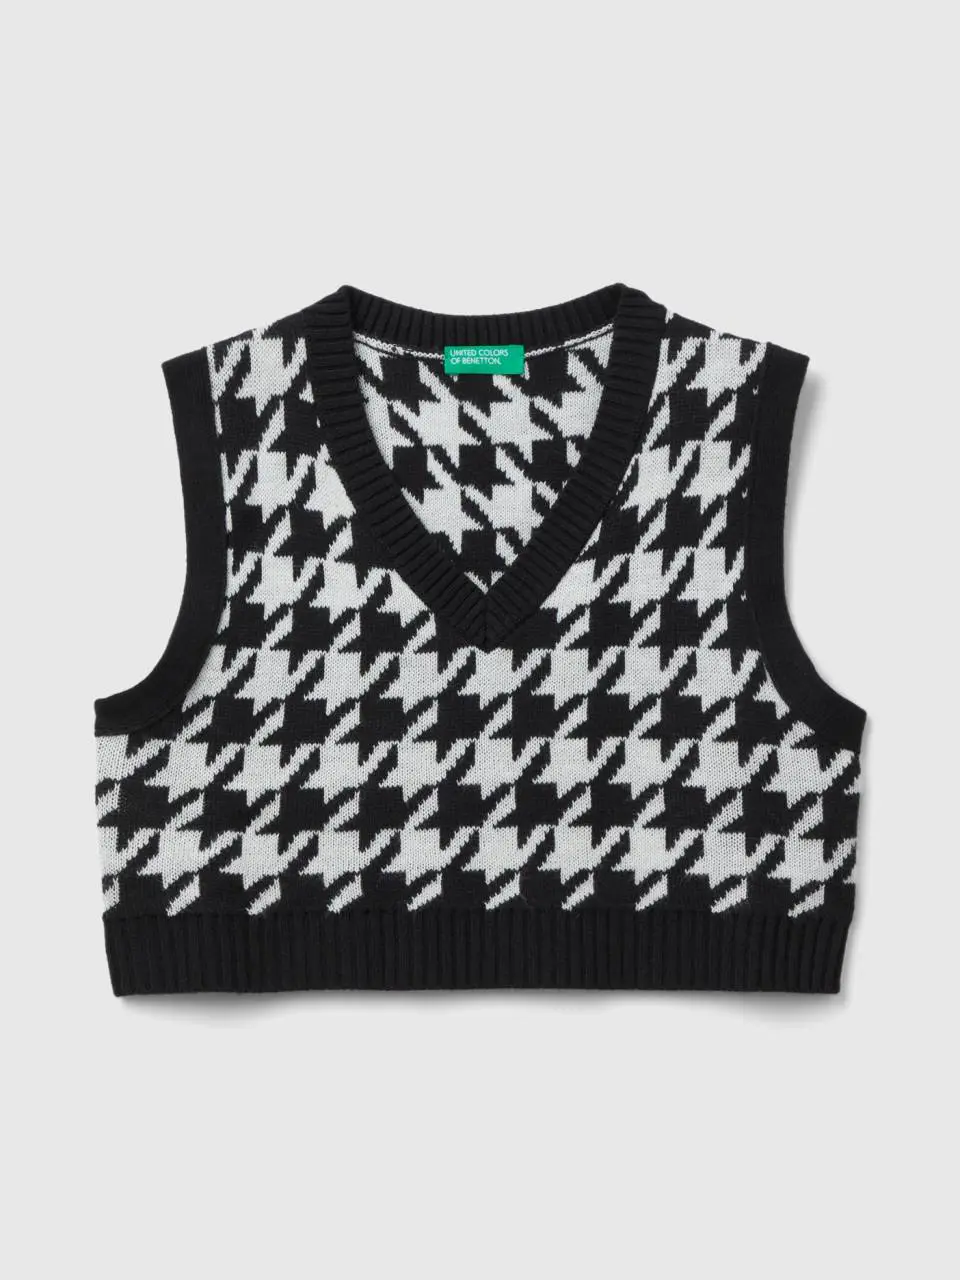 Benetton cropped houndstooth vest. 1